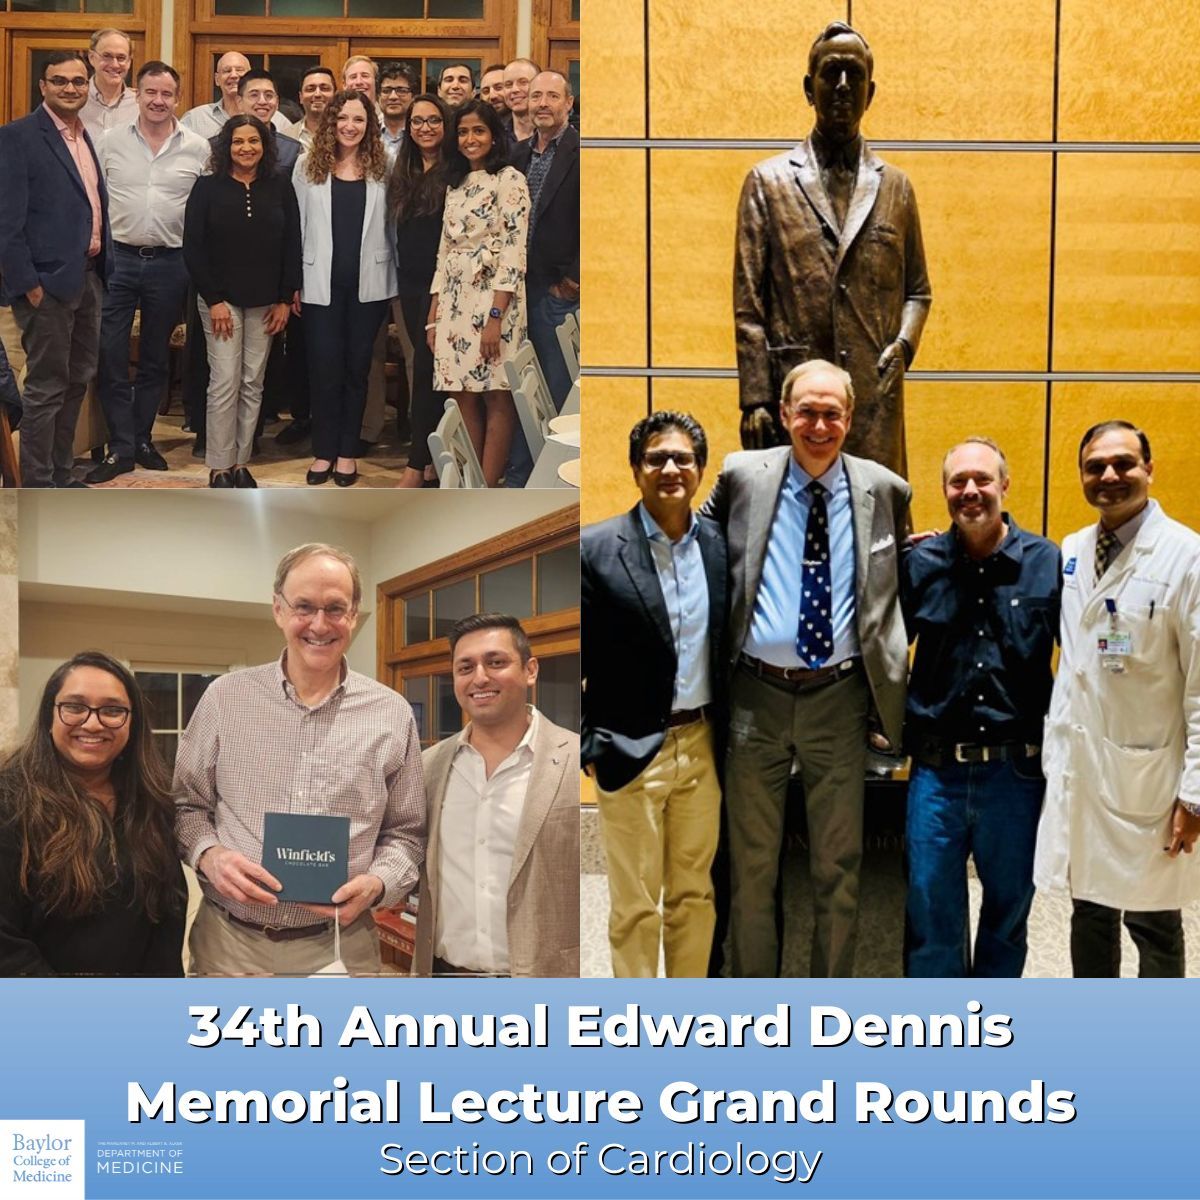 The Section of Cardiology hosted Dr. Roger Blumenthal for the 34th Annual Edward Dennis Memorial Lecture Grand Rounds. Dr. Blumenthal presented to a capacity audience and was welcomed into Dr. Christie Ballantyne's home for Journal Club with BCM Cardiology fellows and faculty. 📖